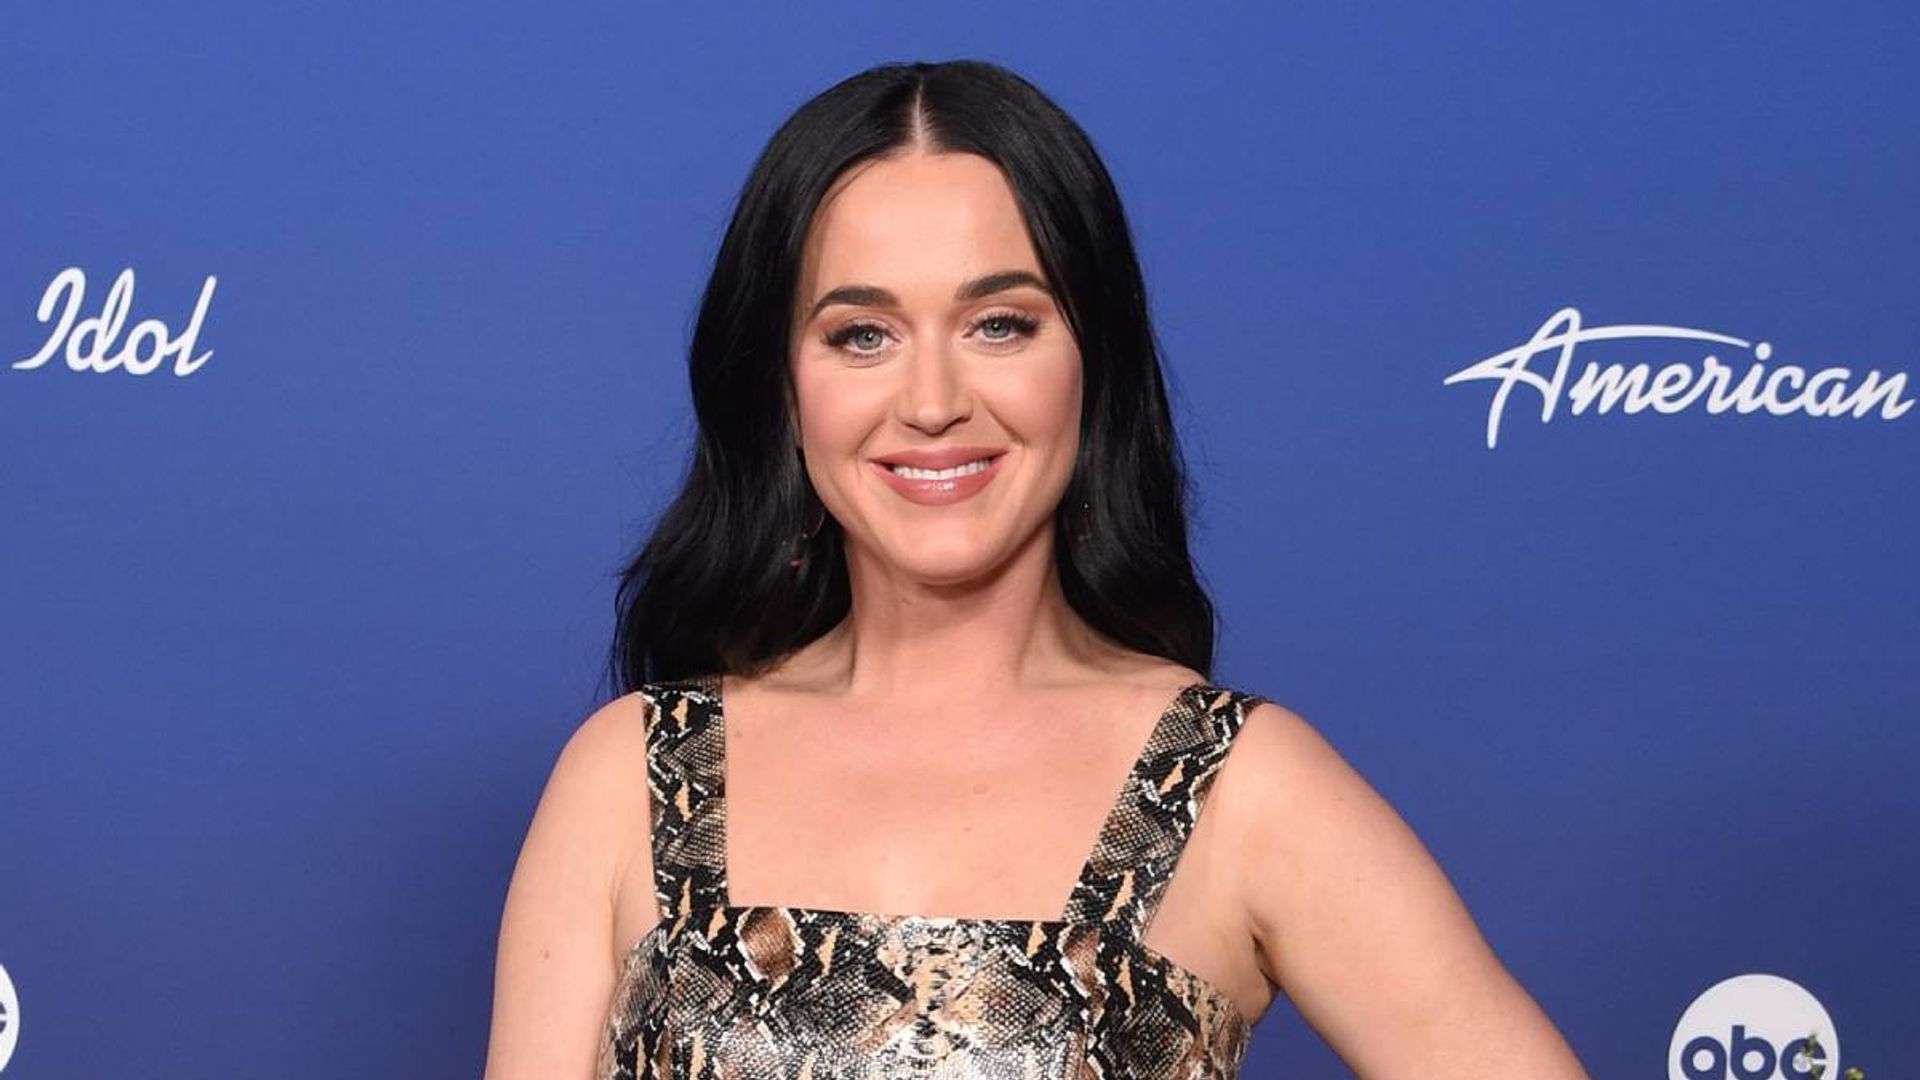 Katy Perry wows in sheer black mini dress for the Met Gala - fans react